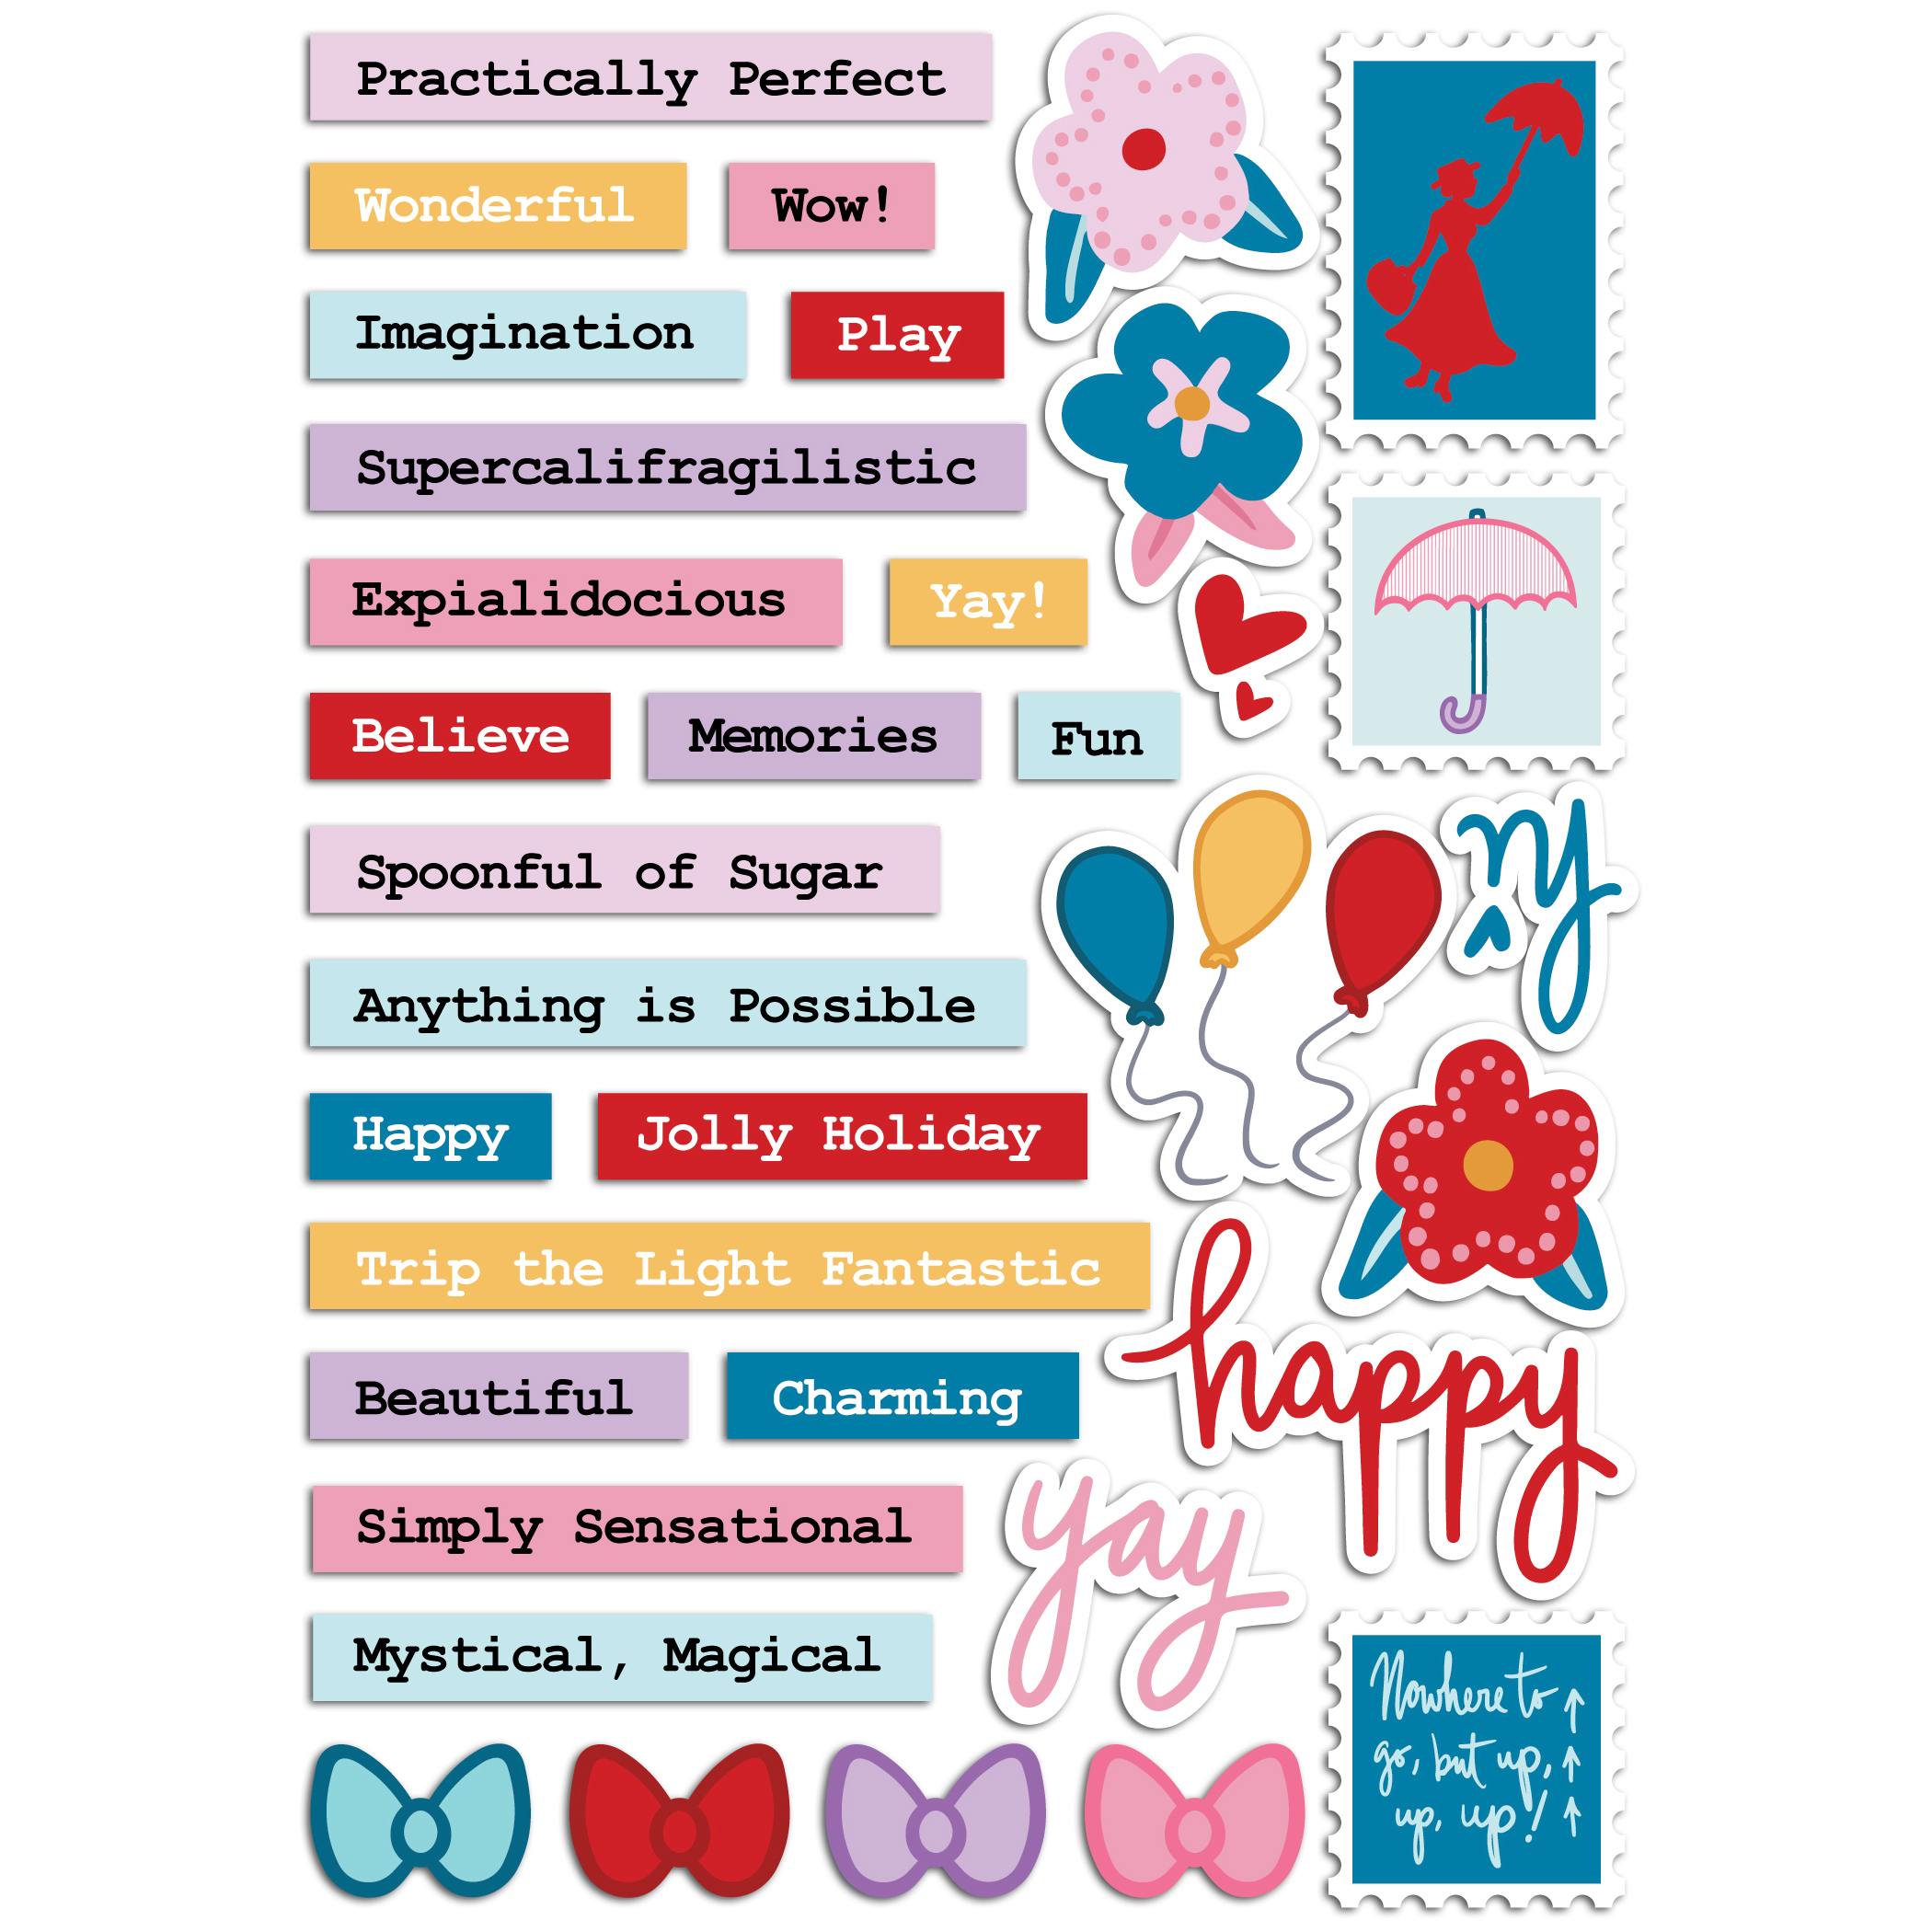 Practically Perfect - Sticker Sheet with shadows square.jpg